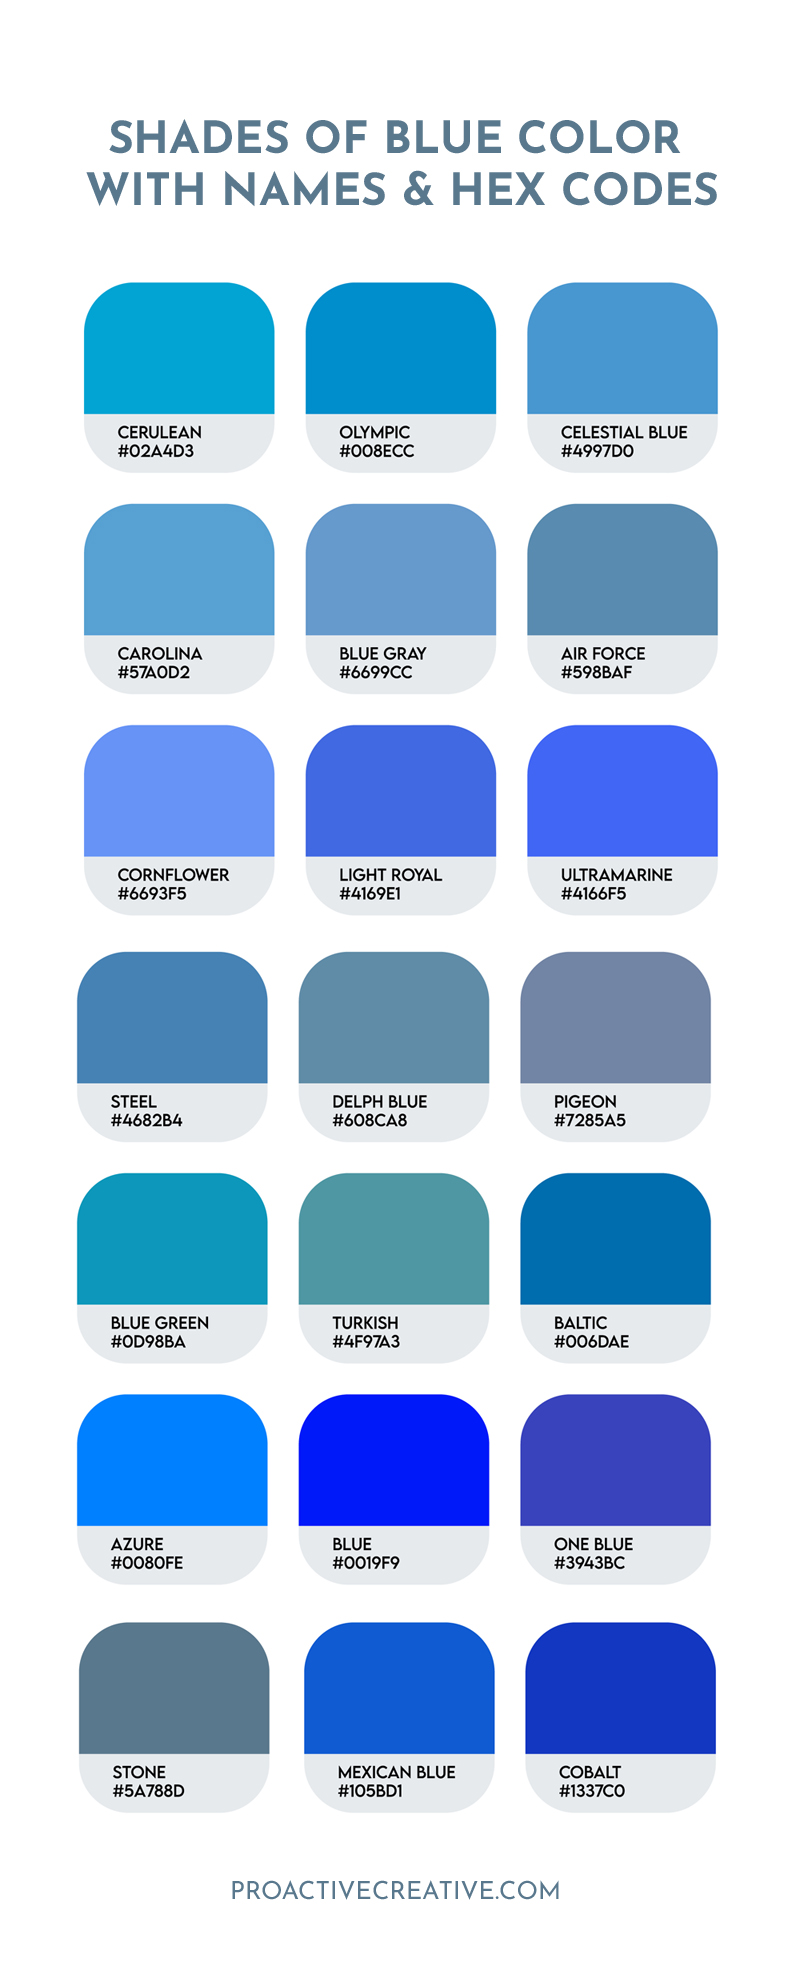 Shades of blue color with hex codes & names